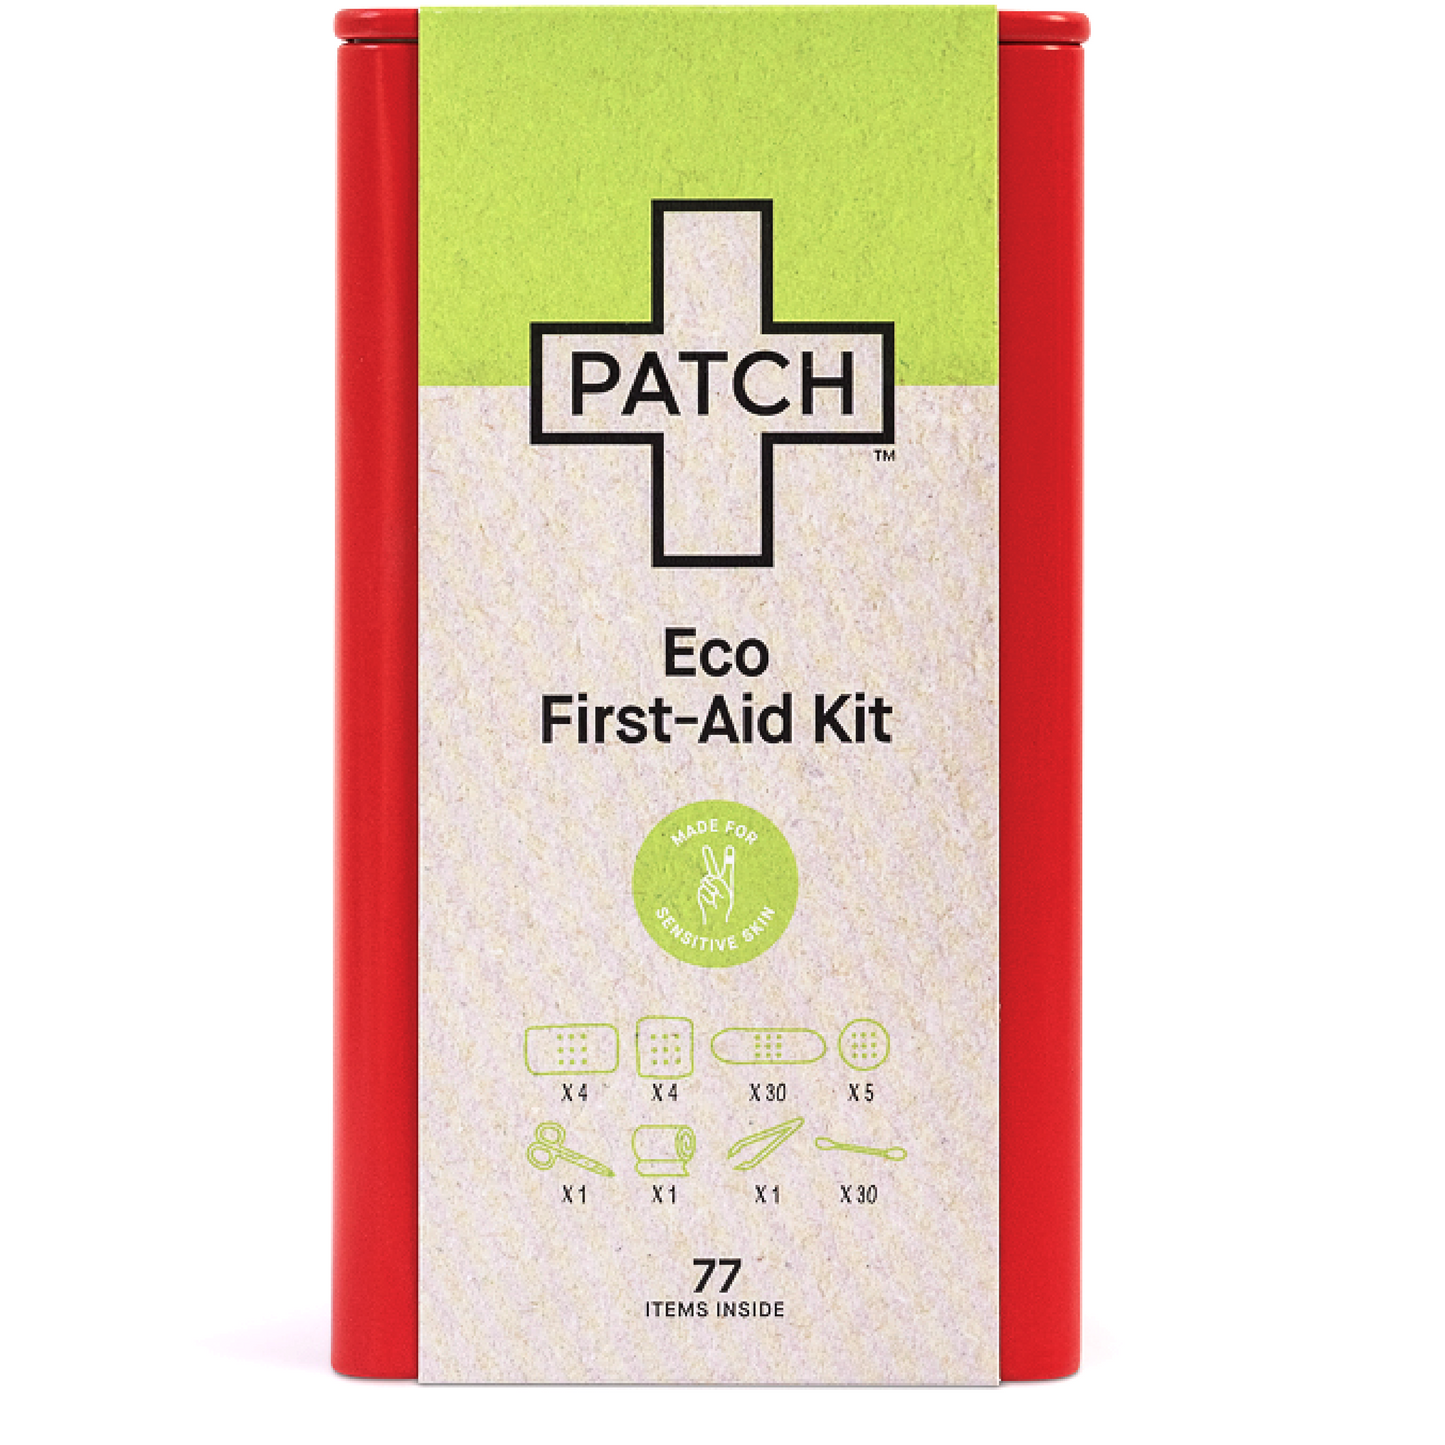 Patch First Aid Kit, Natural Bamboo Bandages, sensitive skin friendly, eco friendly, hypoallergenic, non-toxic, latex free, includes bandages, scissors, tweezers and ear buds